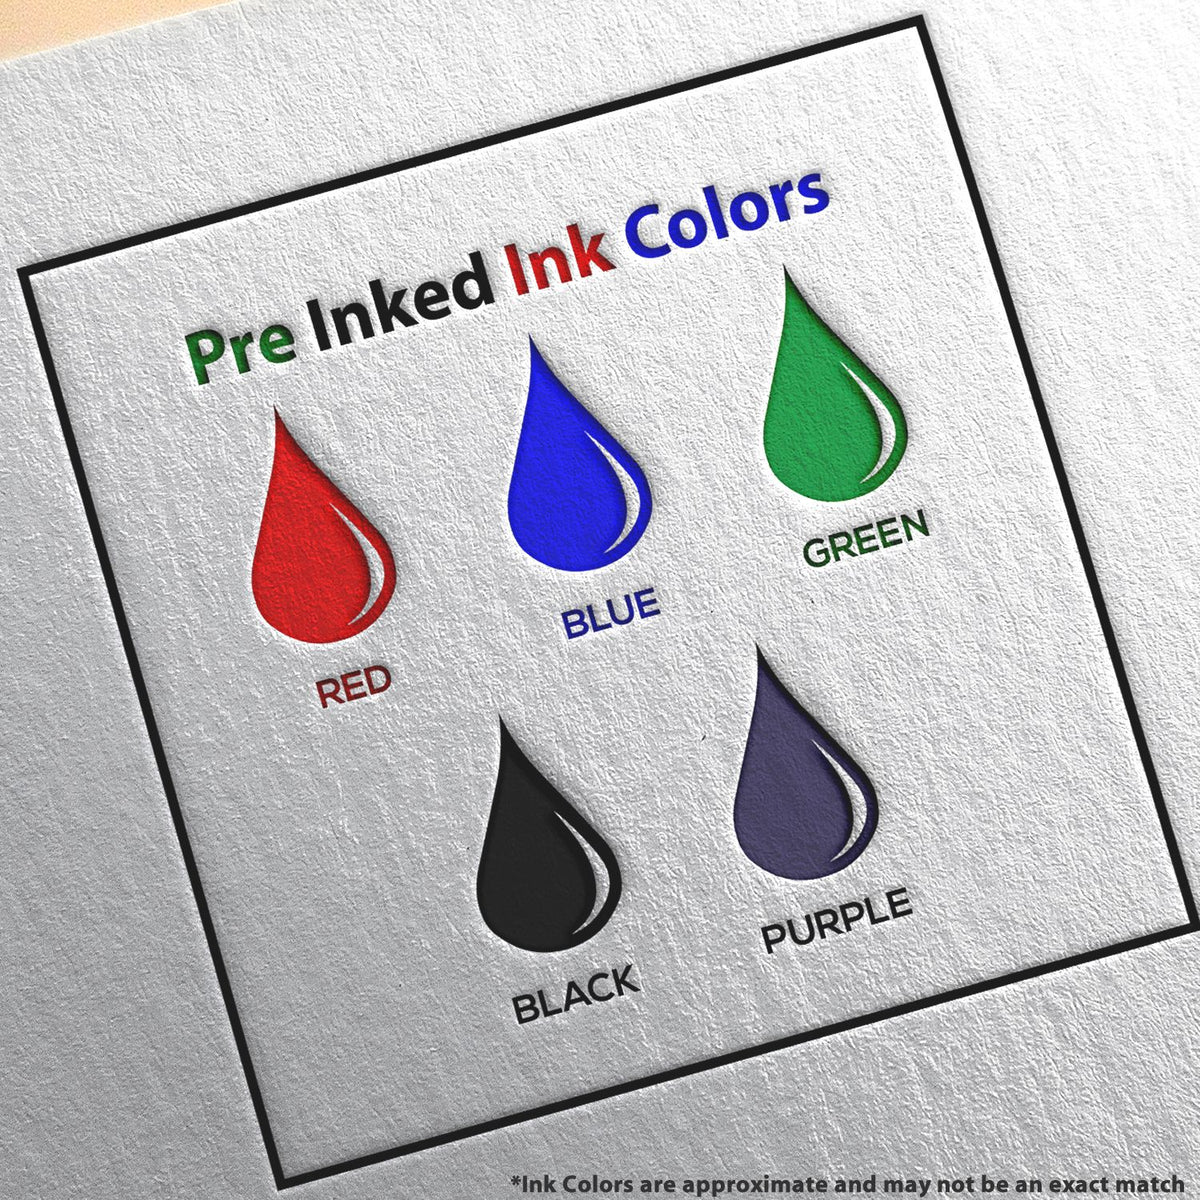 A picture showing the different ink colors or hues available for the Slim Pre-Inked Pennsylvania Professional Engineer Seal Stamp product.